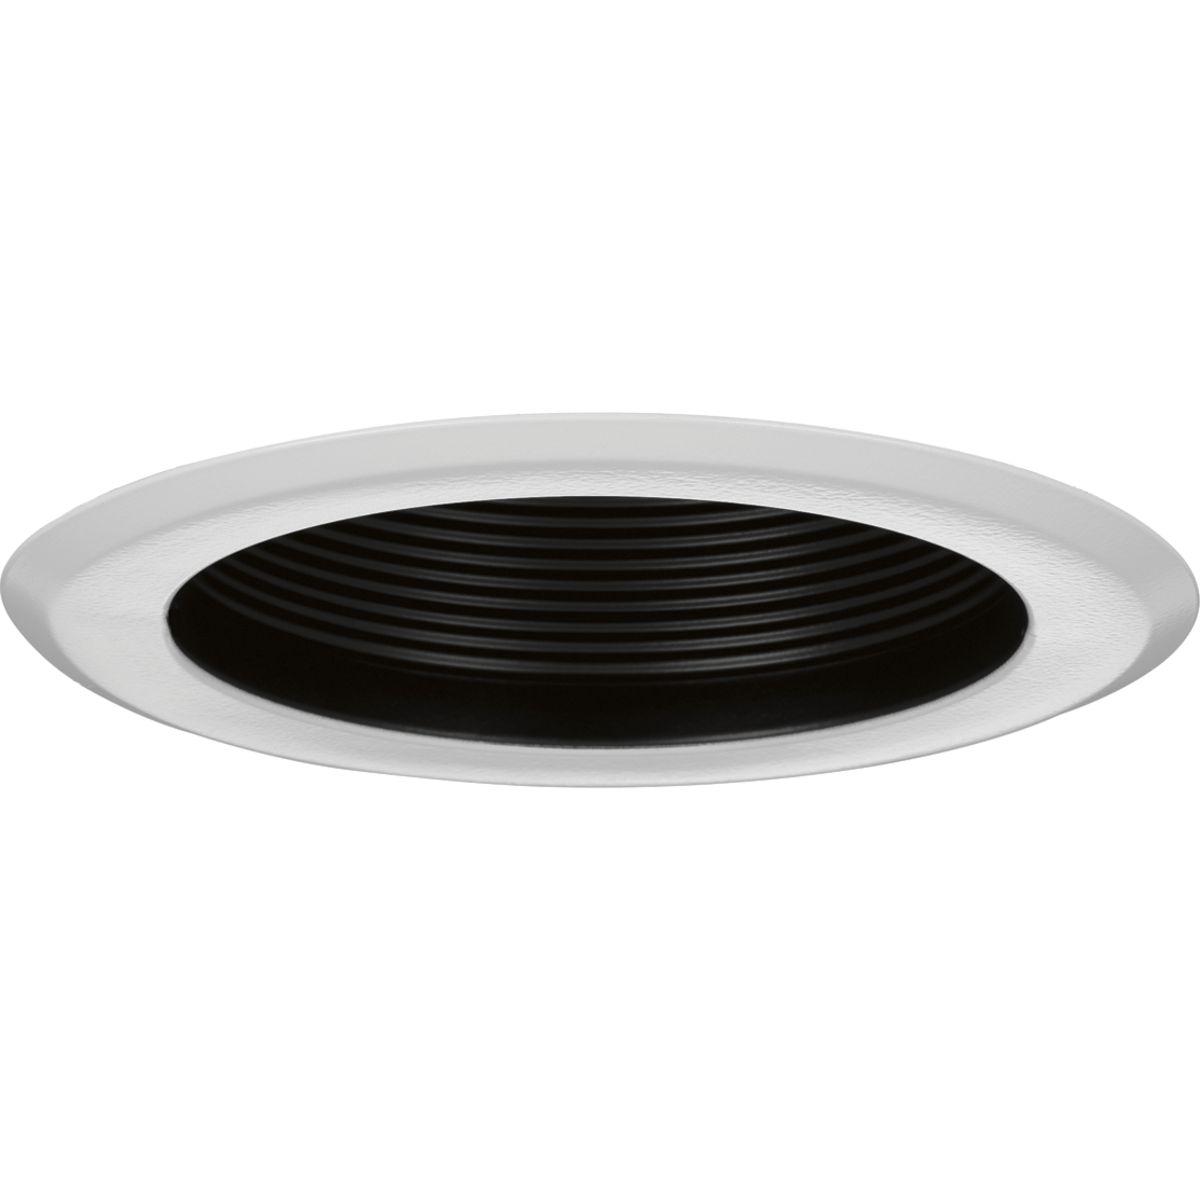 Hubbell P868-31 5" Step Baffle Trim in a Black finish and bright white powdered painted metal flange. UL and CUL listed for damp locations. The trim uses friction springs to attach to the housing to provide a flush fit against the ceiling. Compatible for use in Progress 